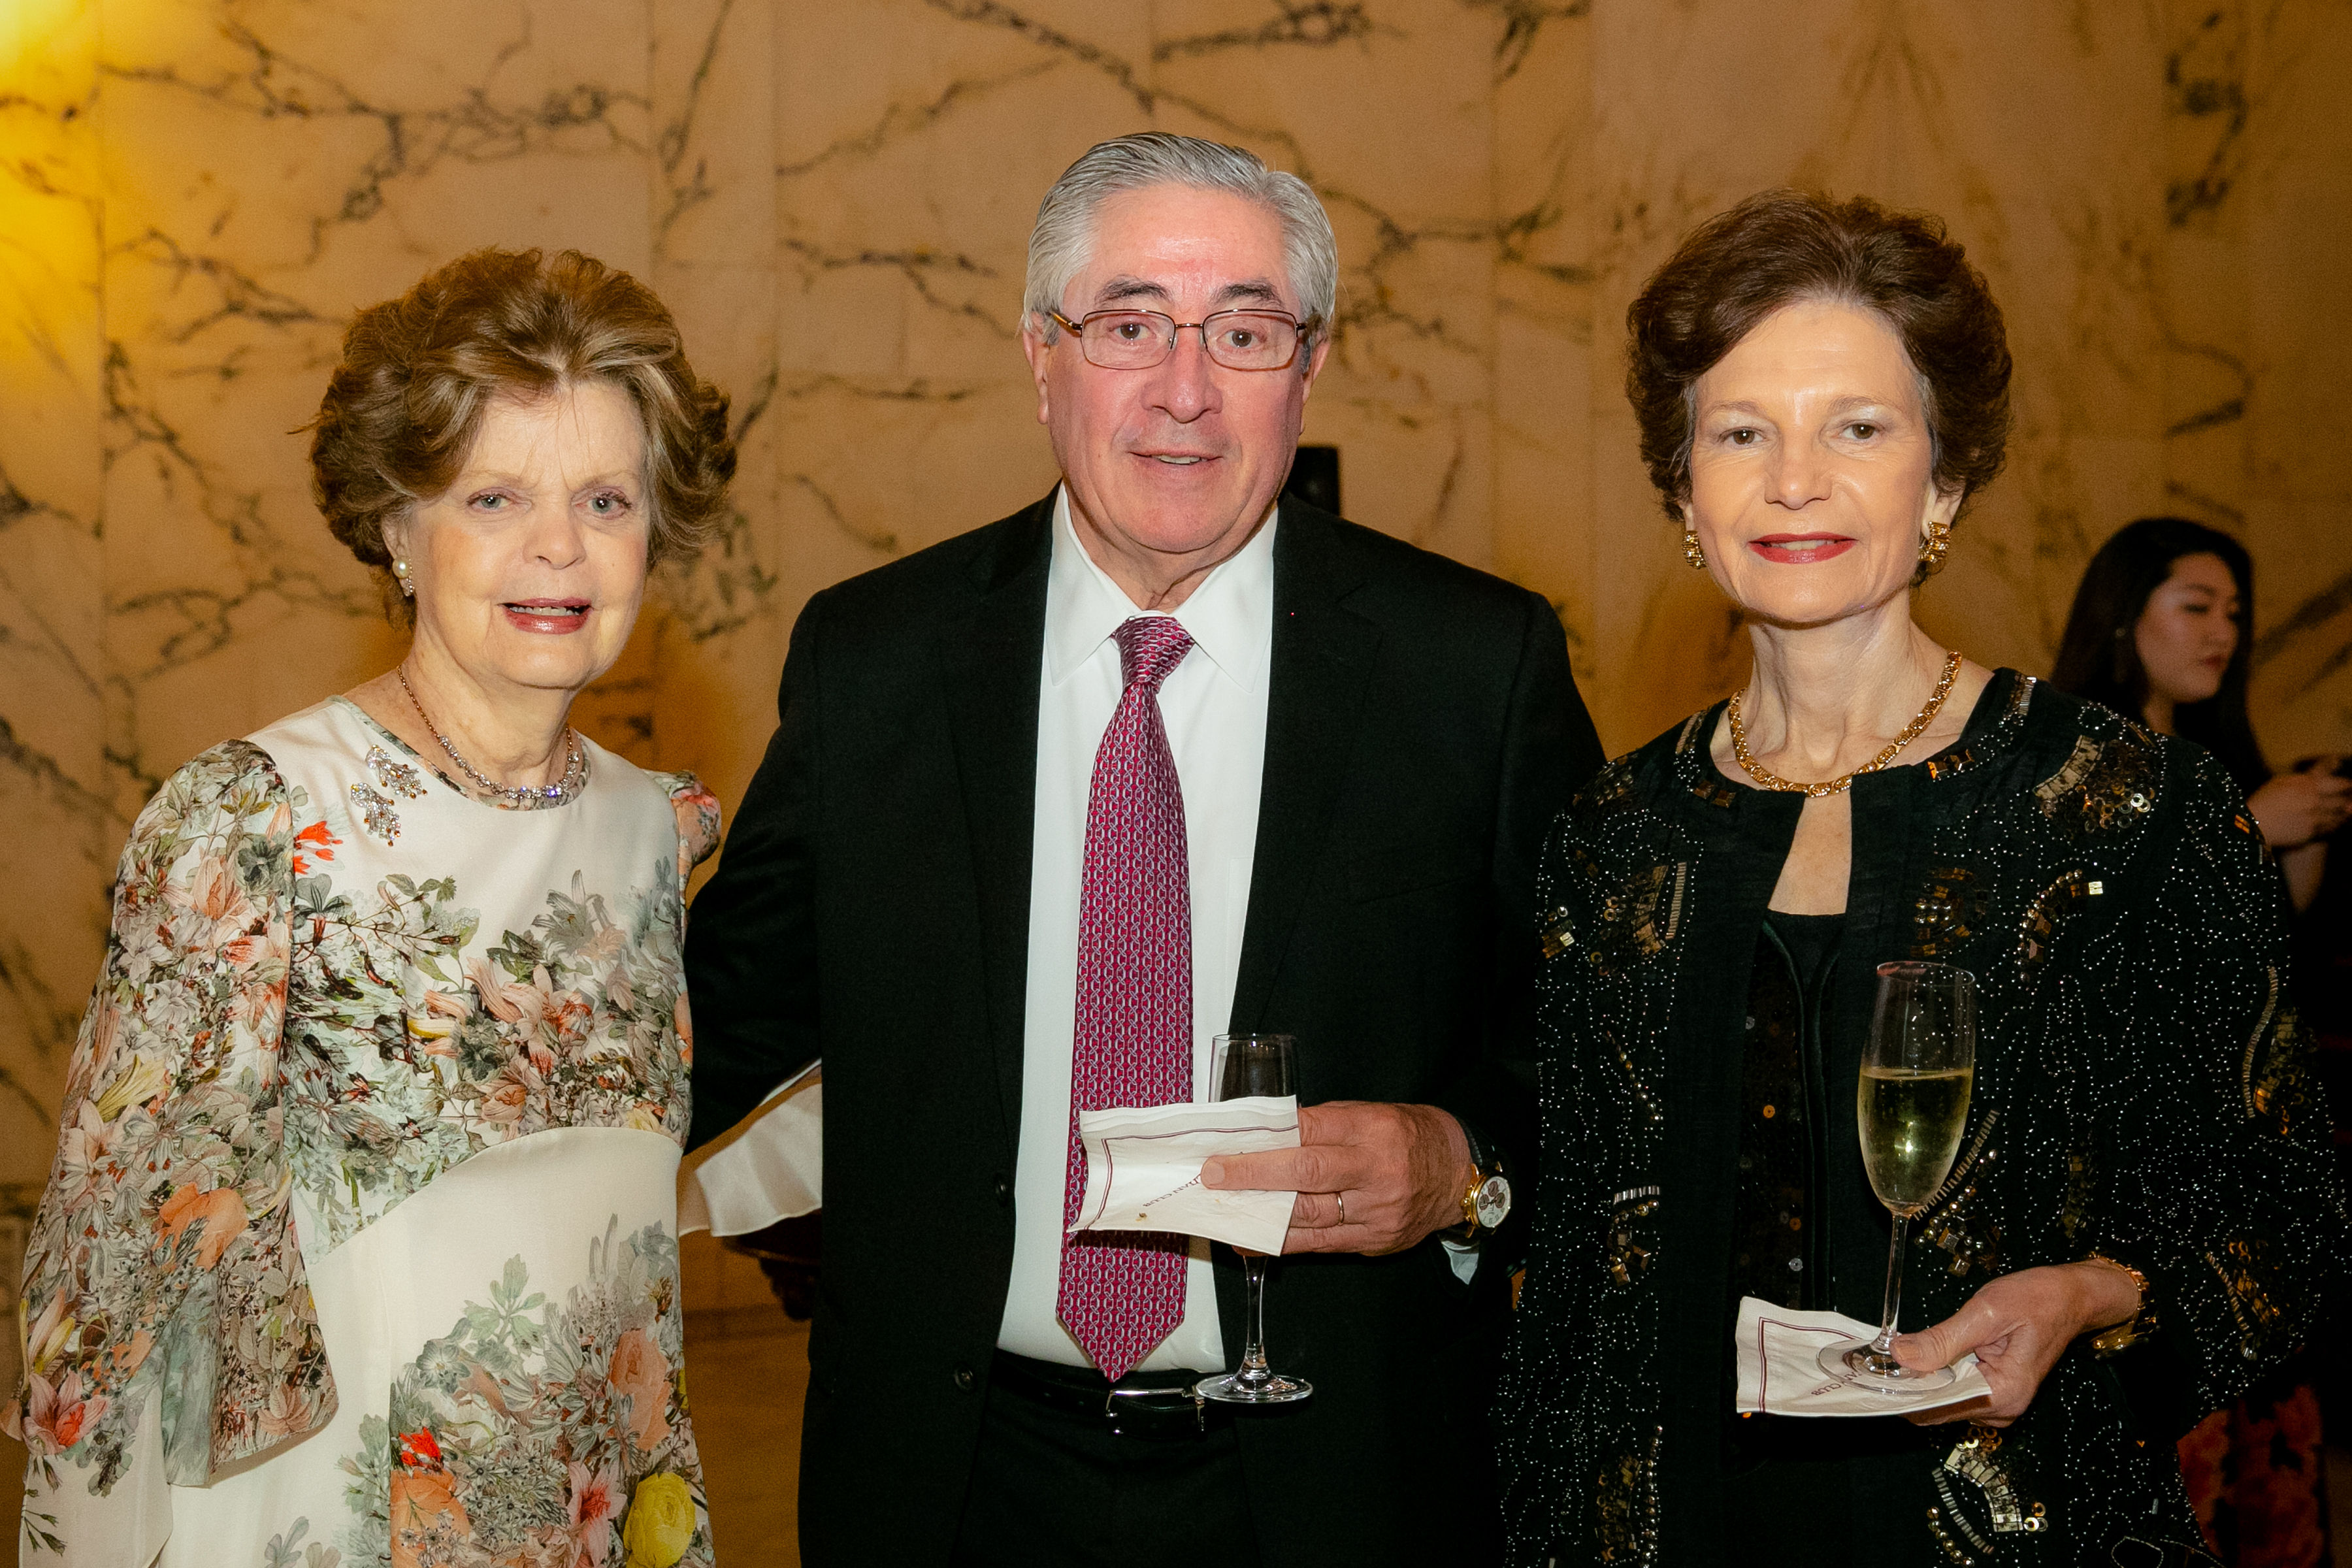 Dr. Legato standing next to a male and female guest holding champagne glasses